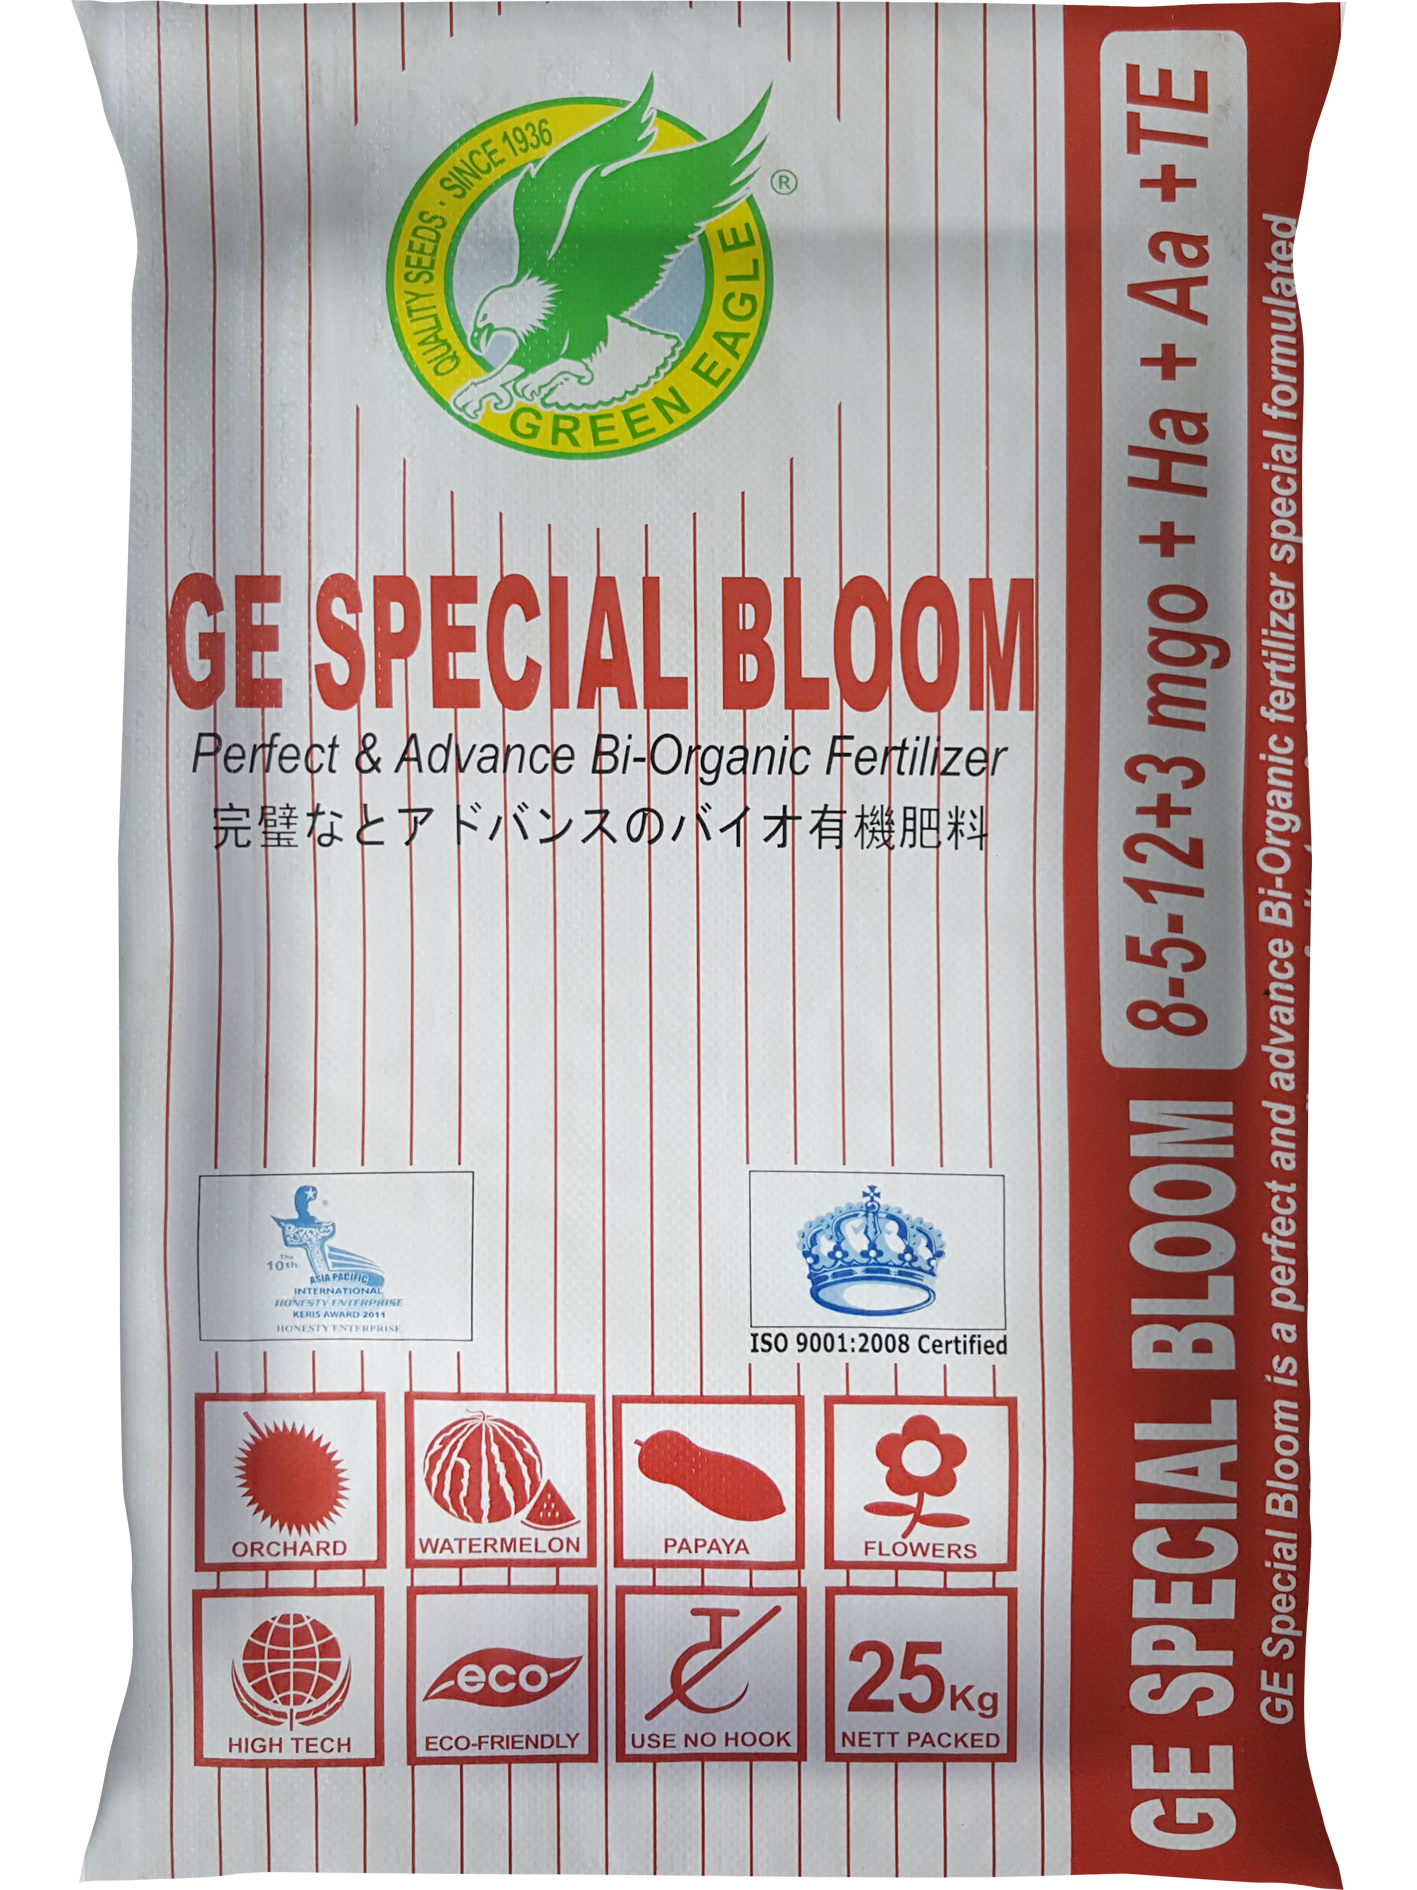 GE Special Bloom bag design (use this)